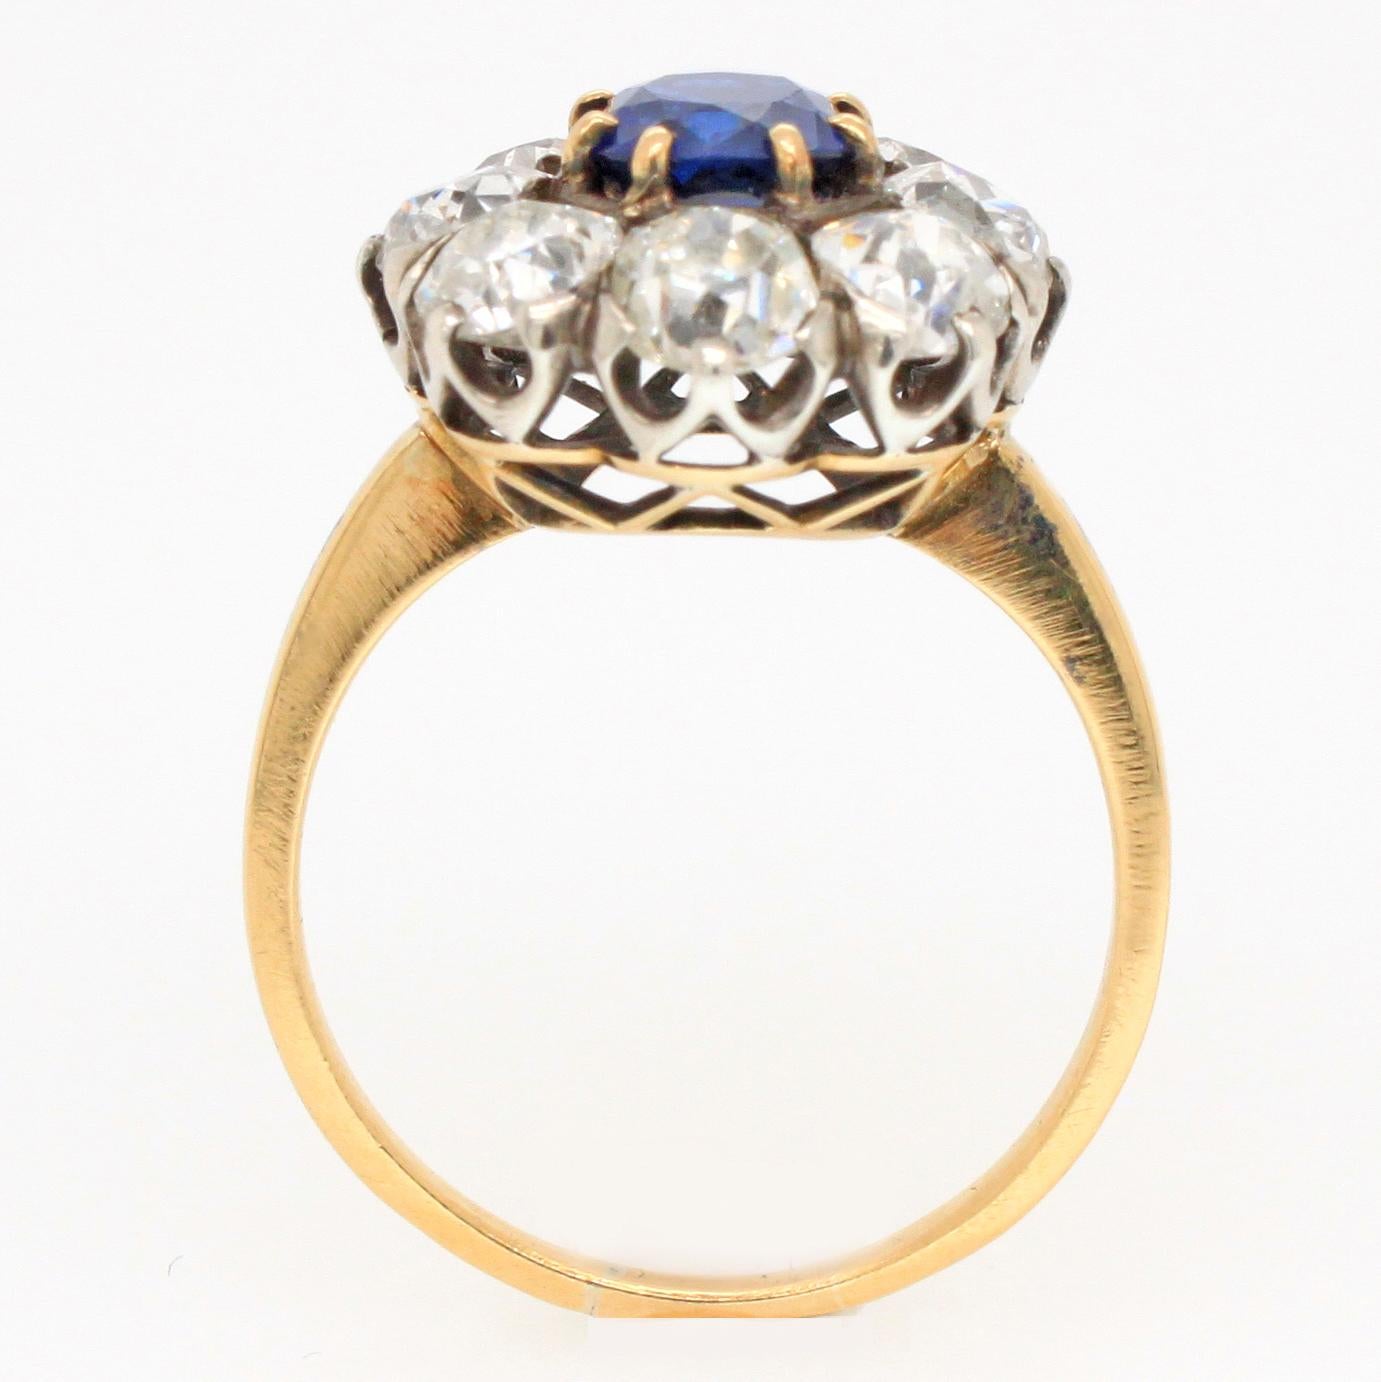 Antique Cushion Cut Victorian Sapphire 'No Heat' and Diamond Cluster Ring, 1880s